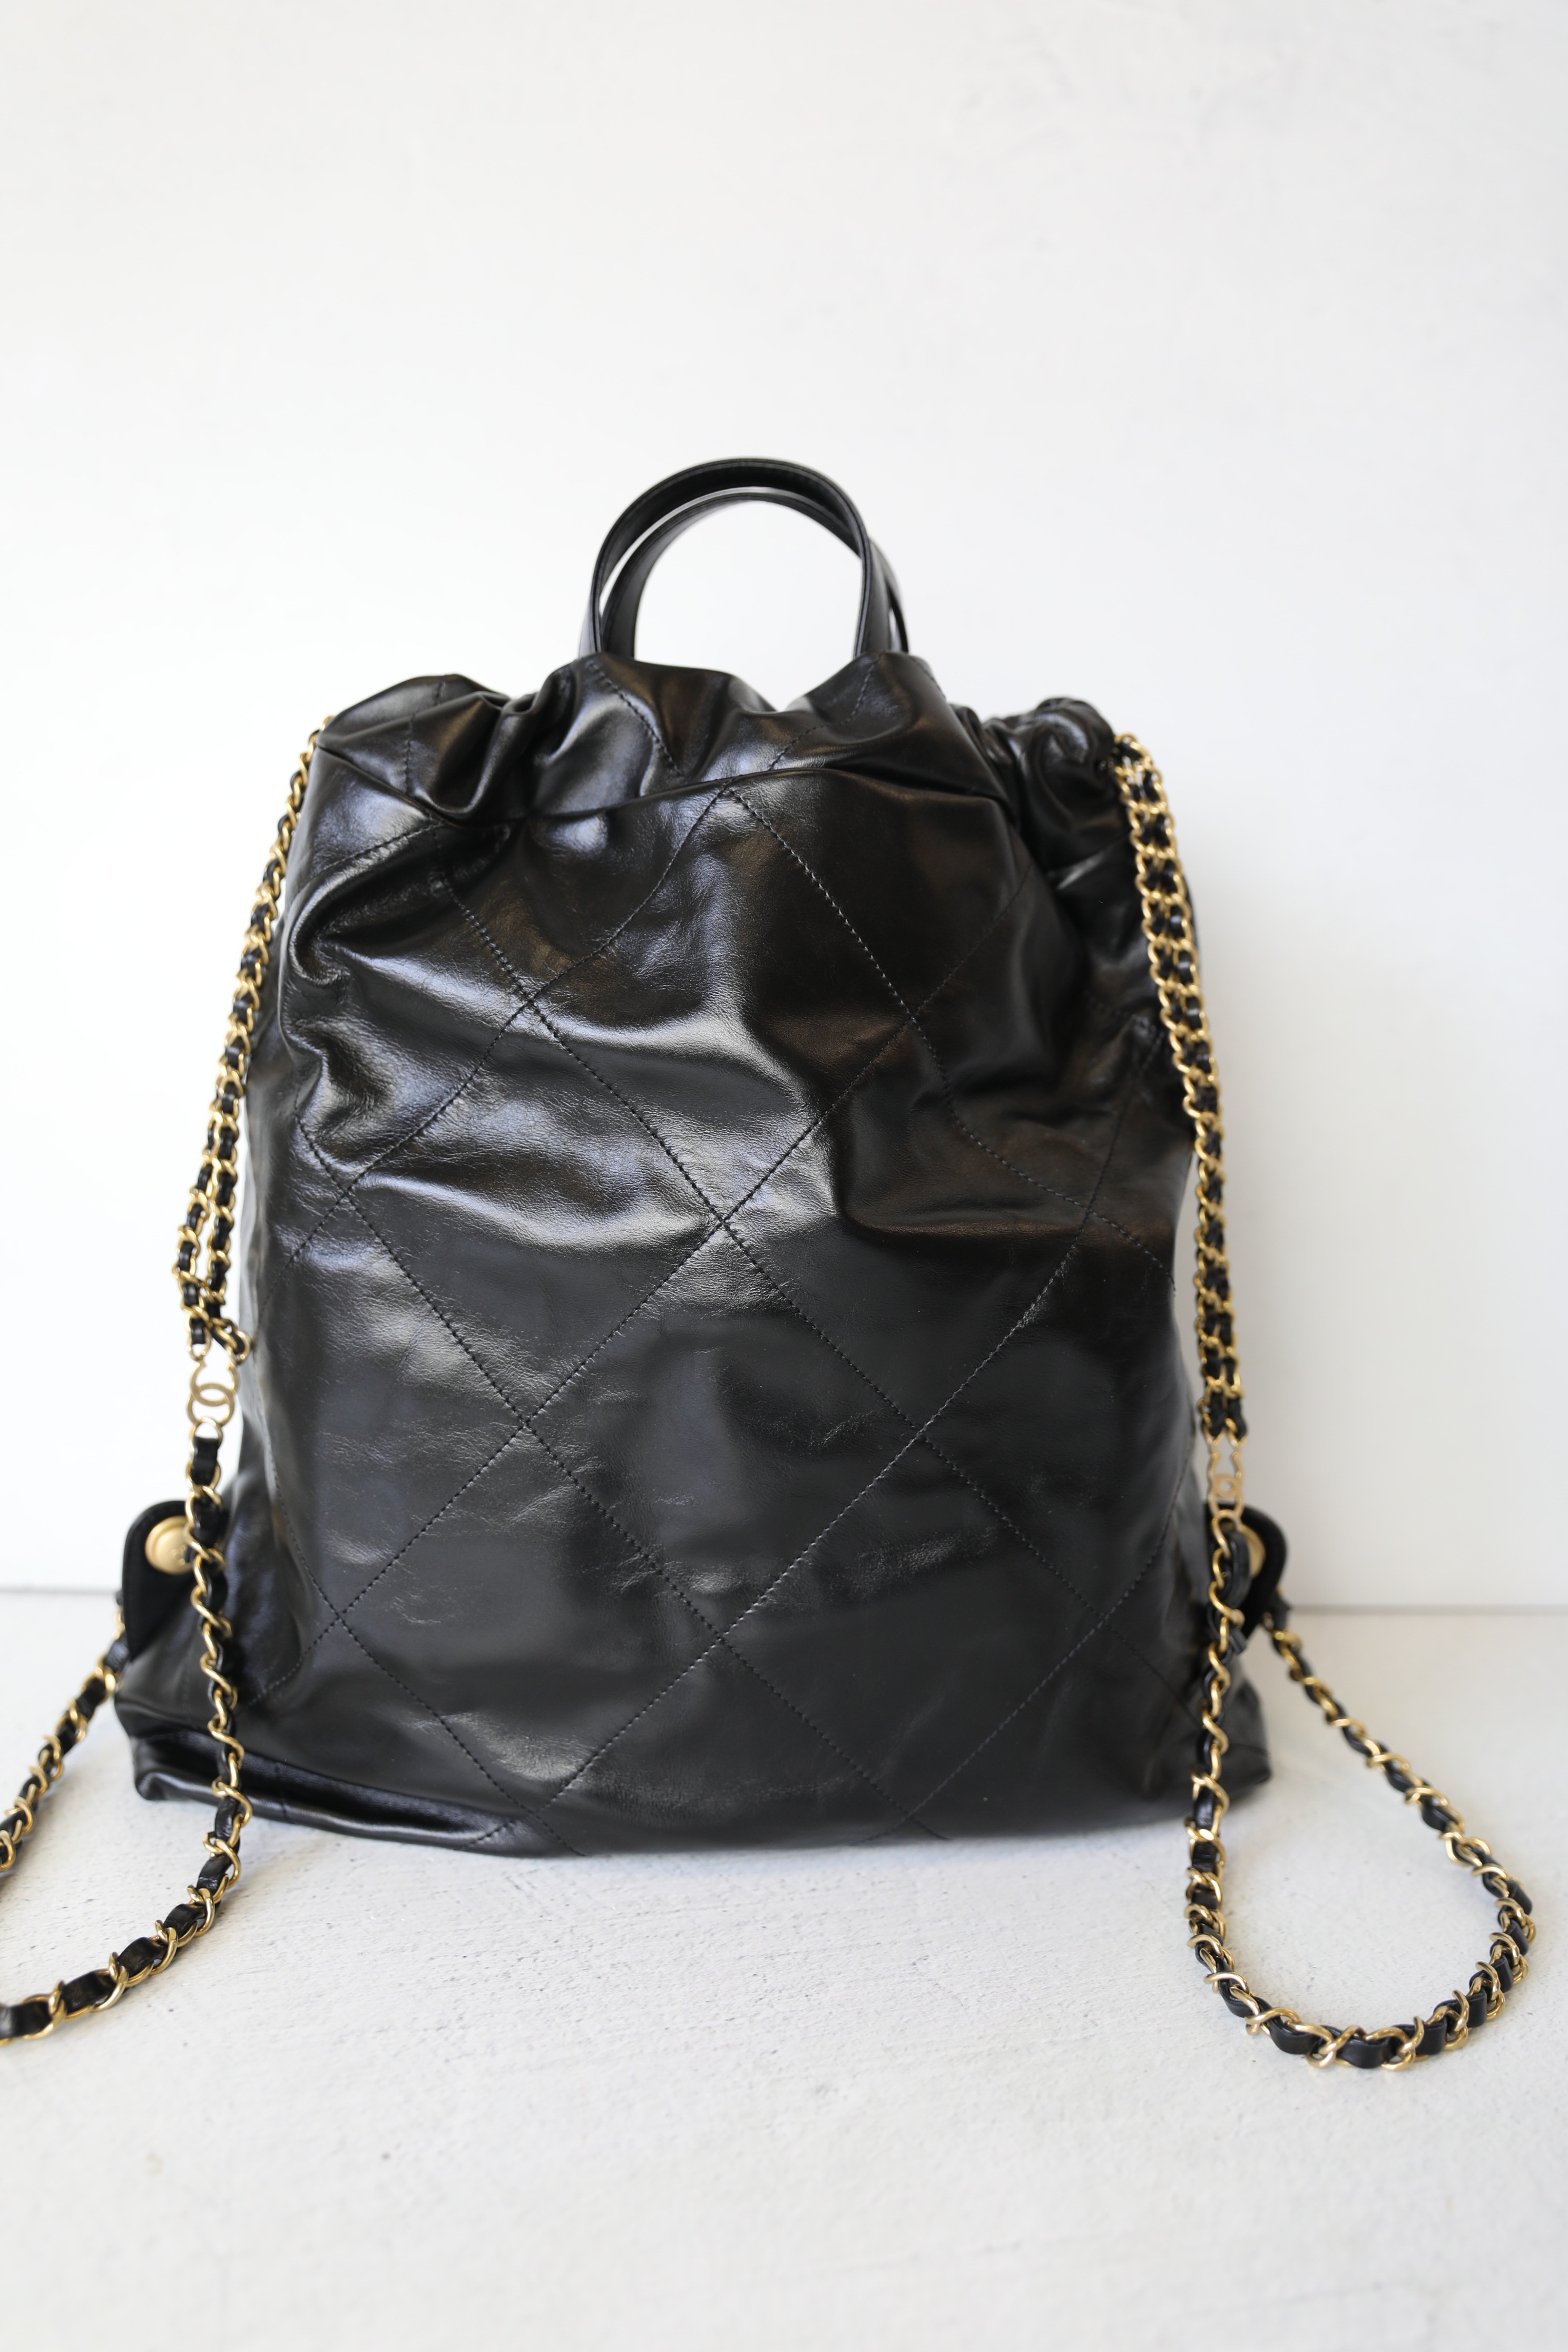 Chanel 22 Tote Backpack Large, Black, Preowned No Dustbag WA001